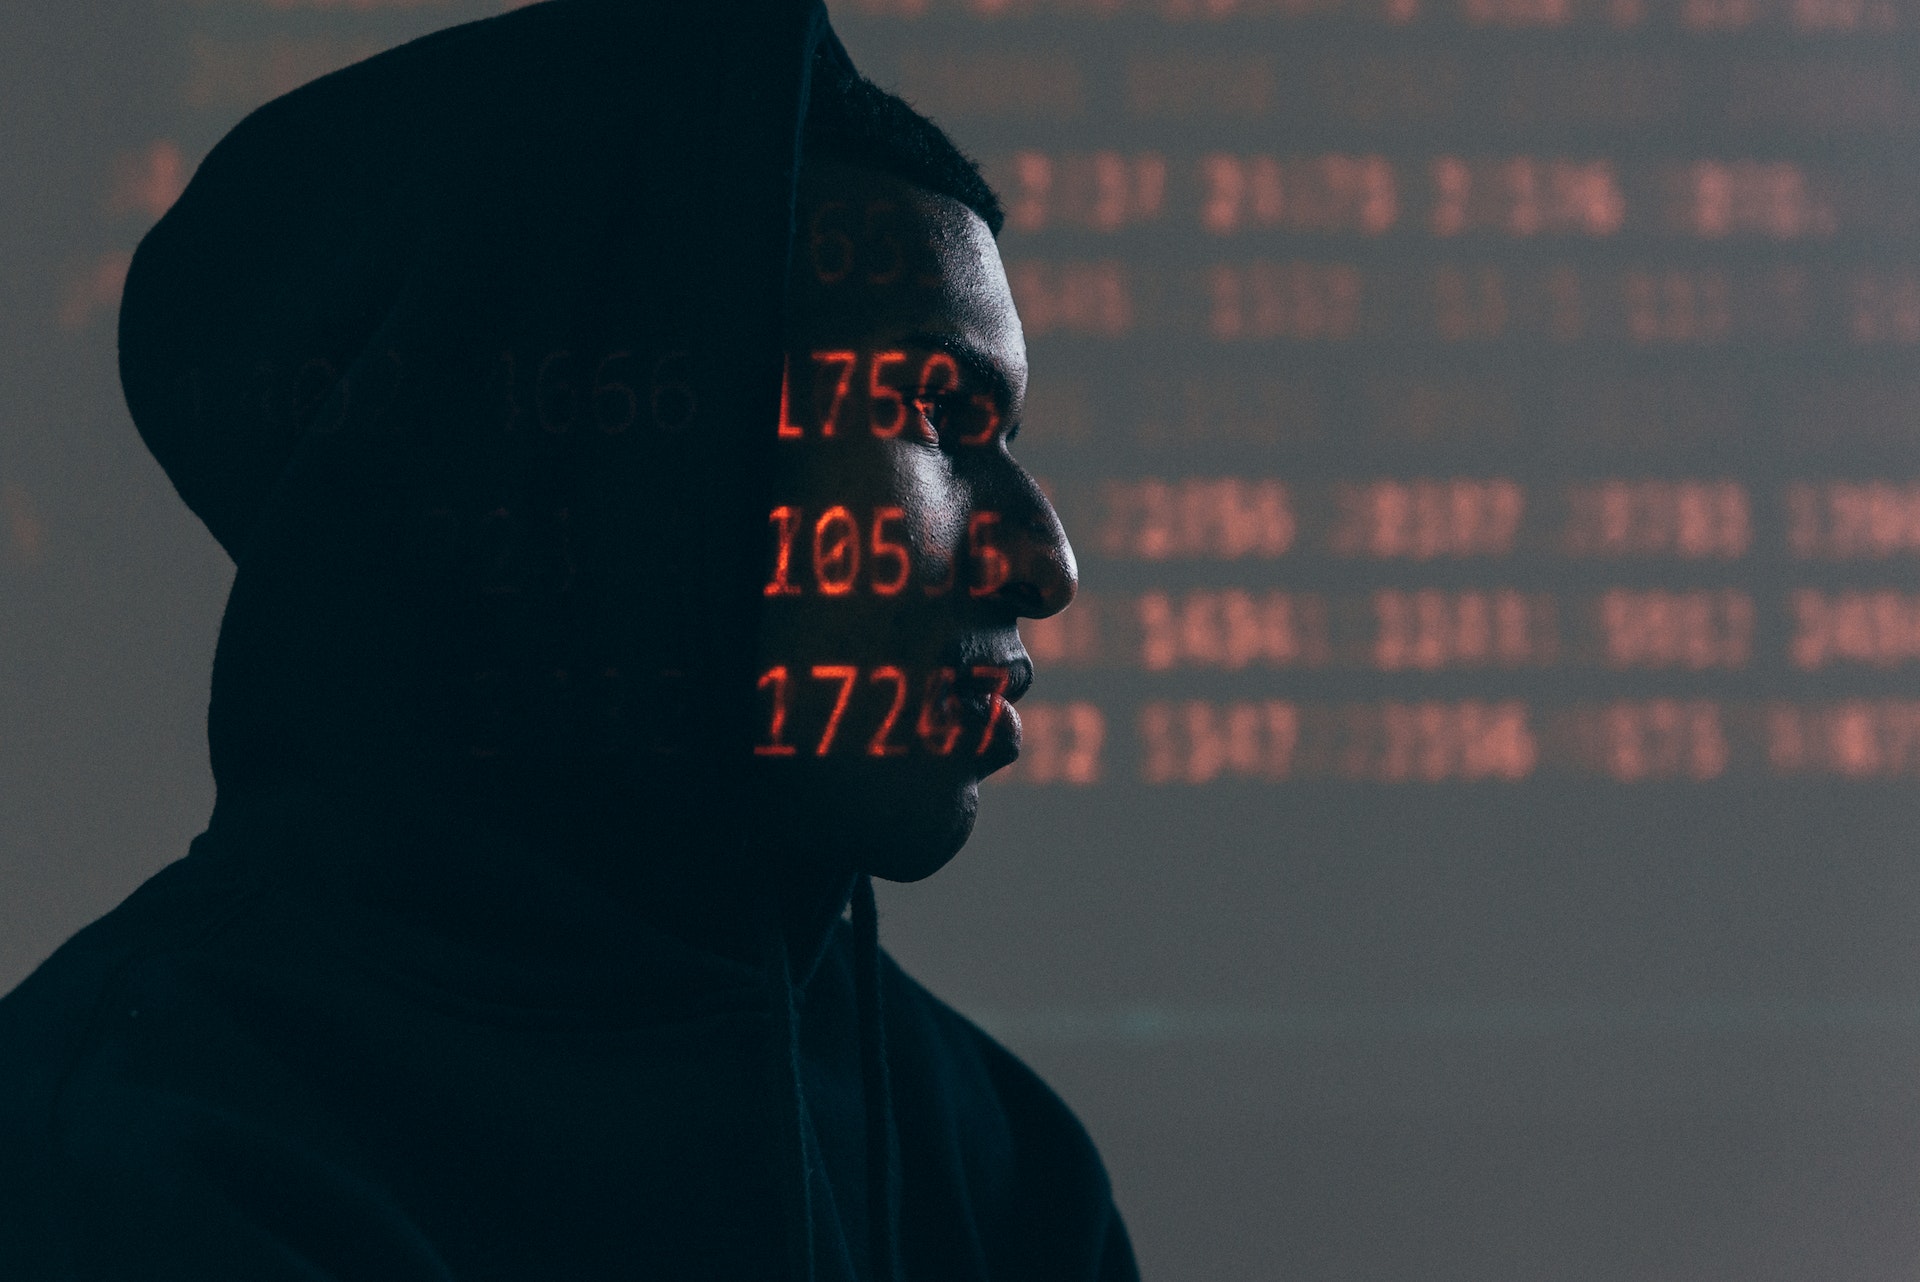 Image of hacker with superimposed digital text